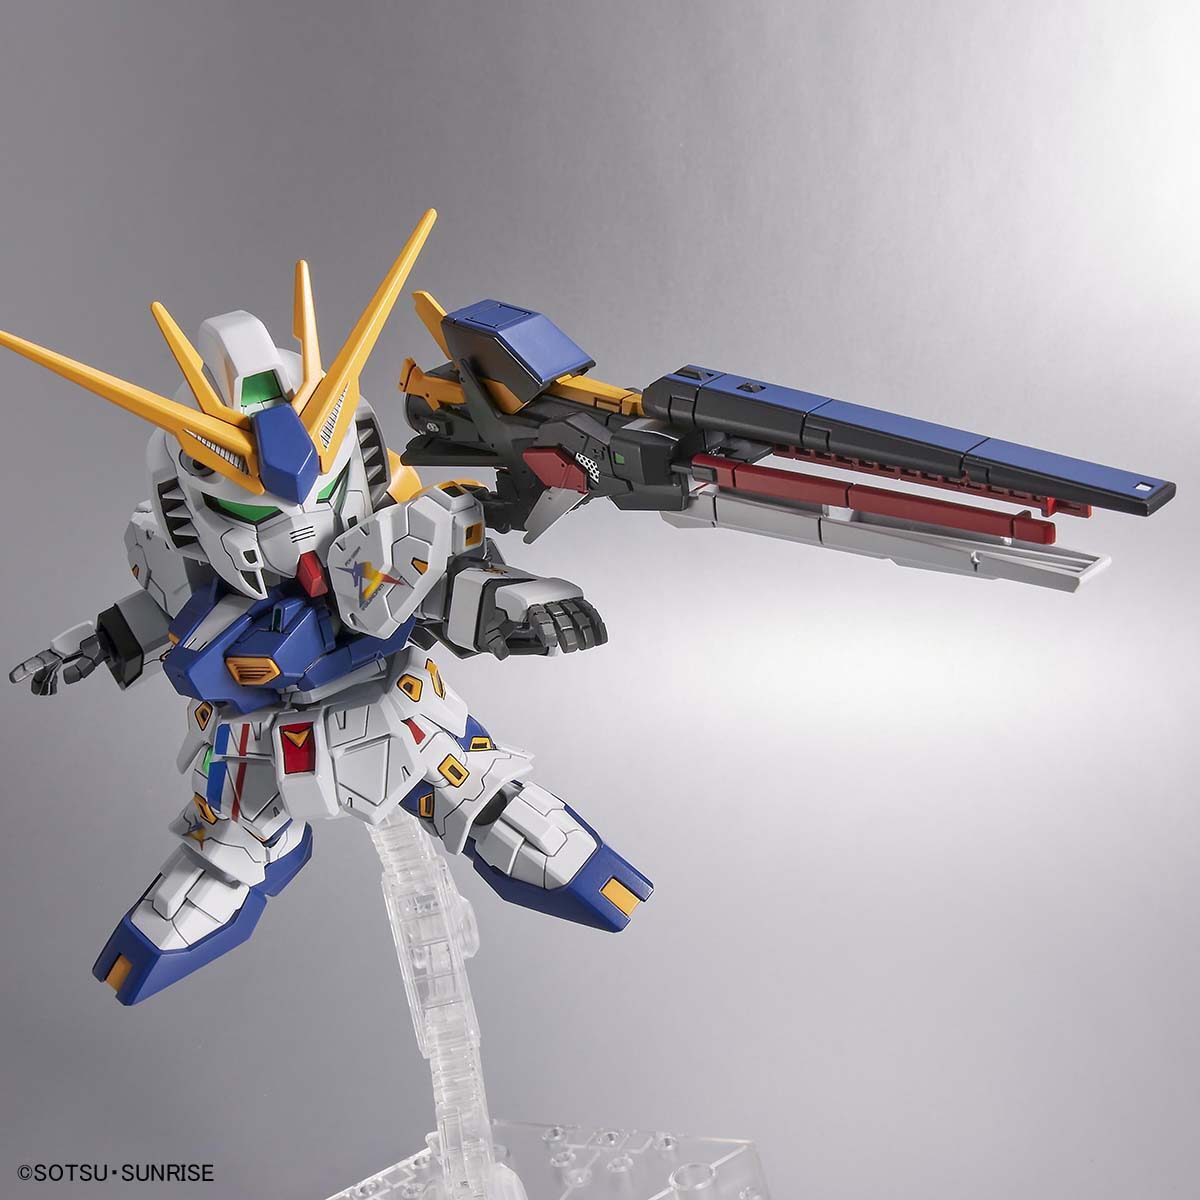 3MF file Real Grade RX-93 HI NU V2 Gundam Stand with weapons stand